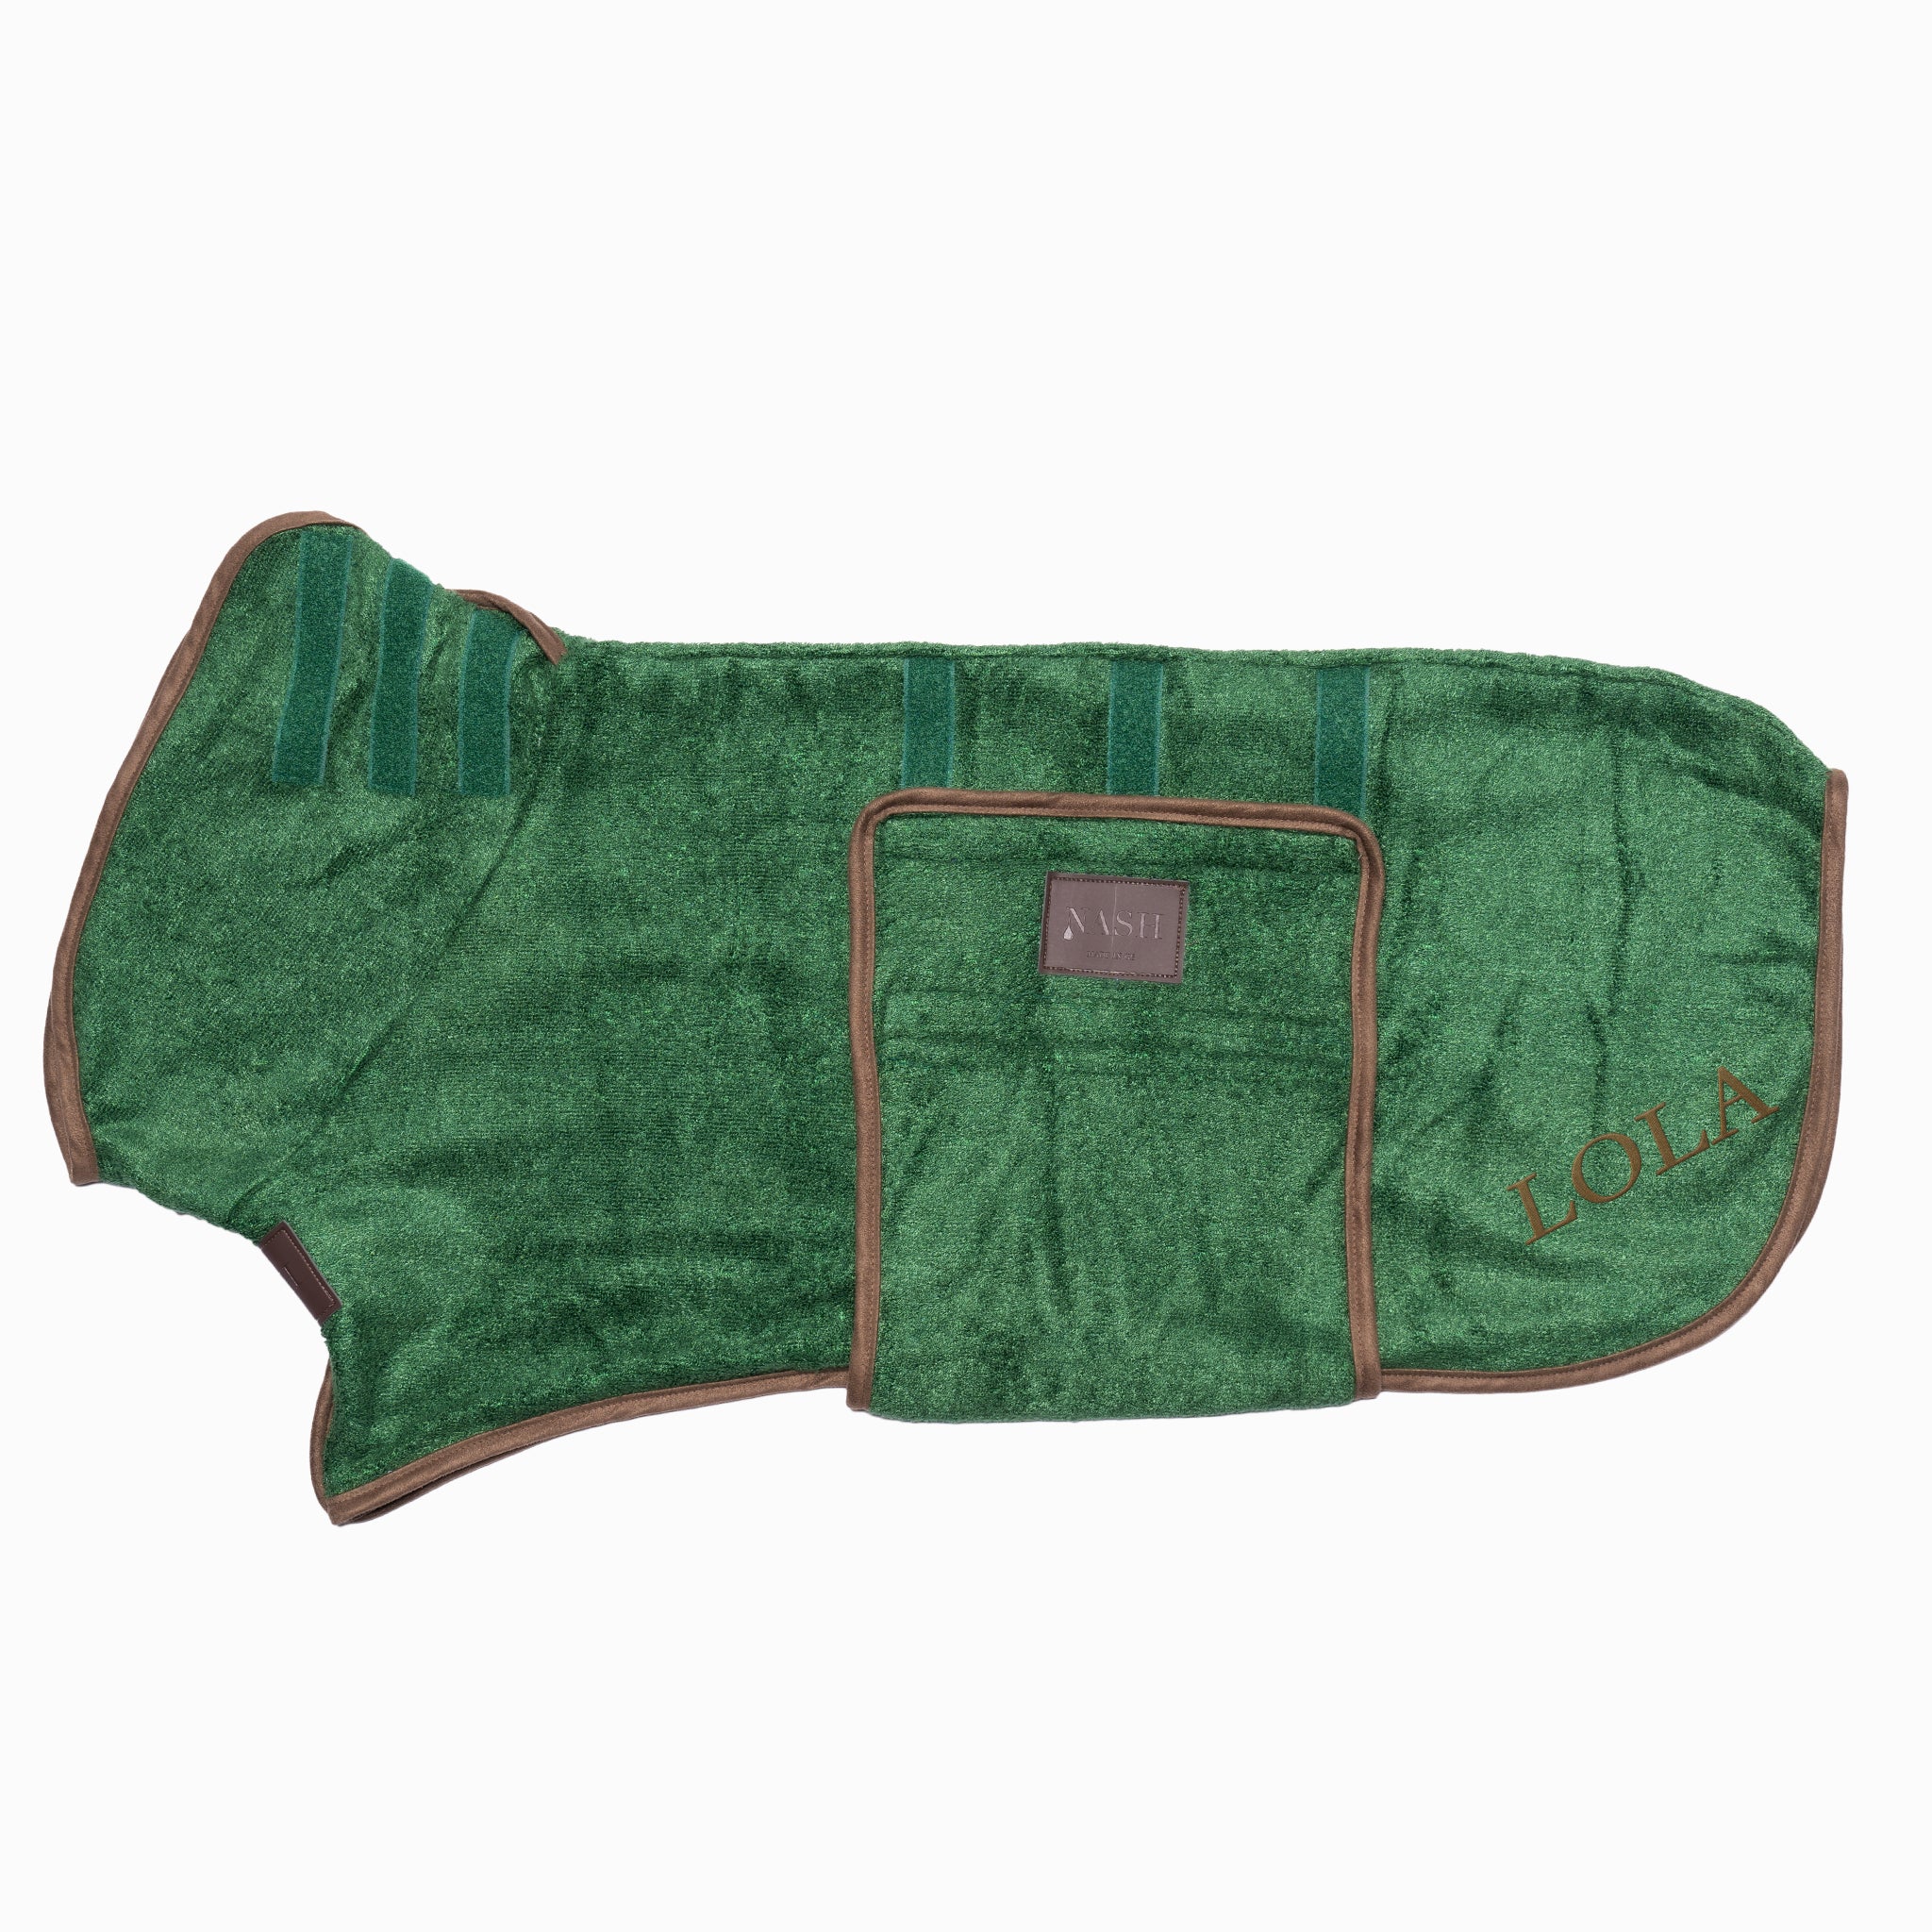 Premium bamboo dog drying coat in forest green - available from NASH Dog Co. 